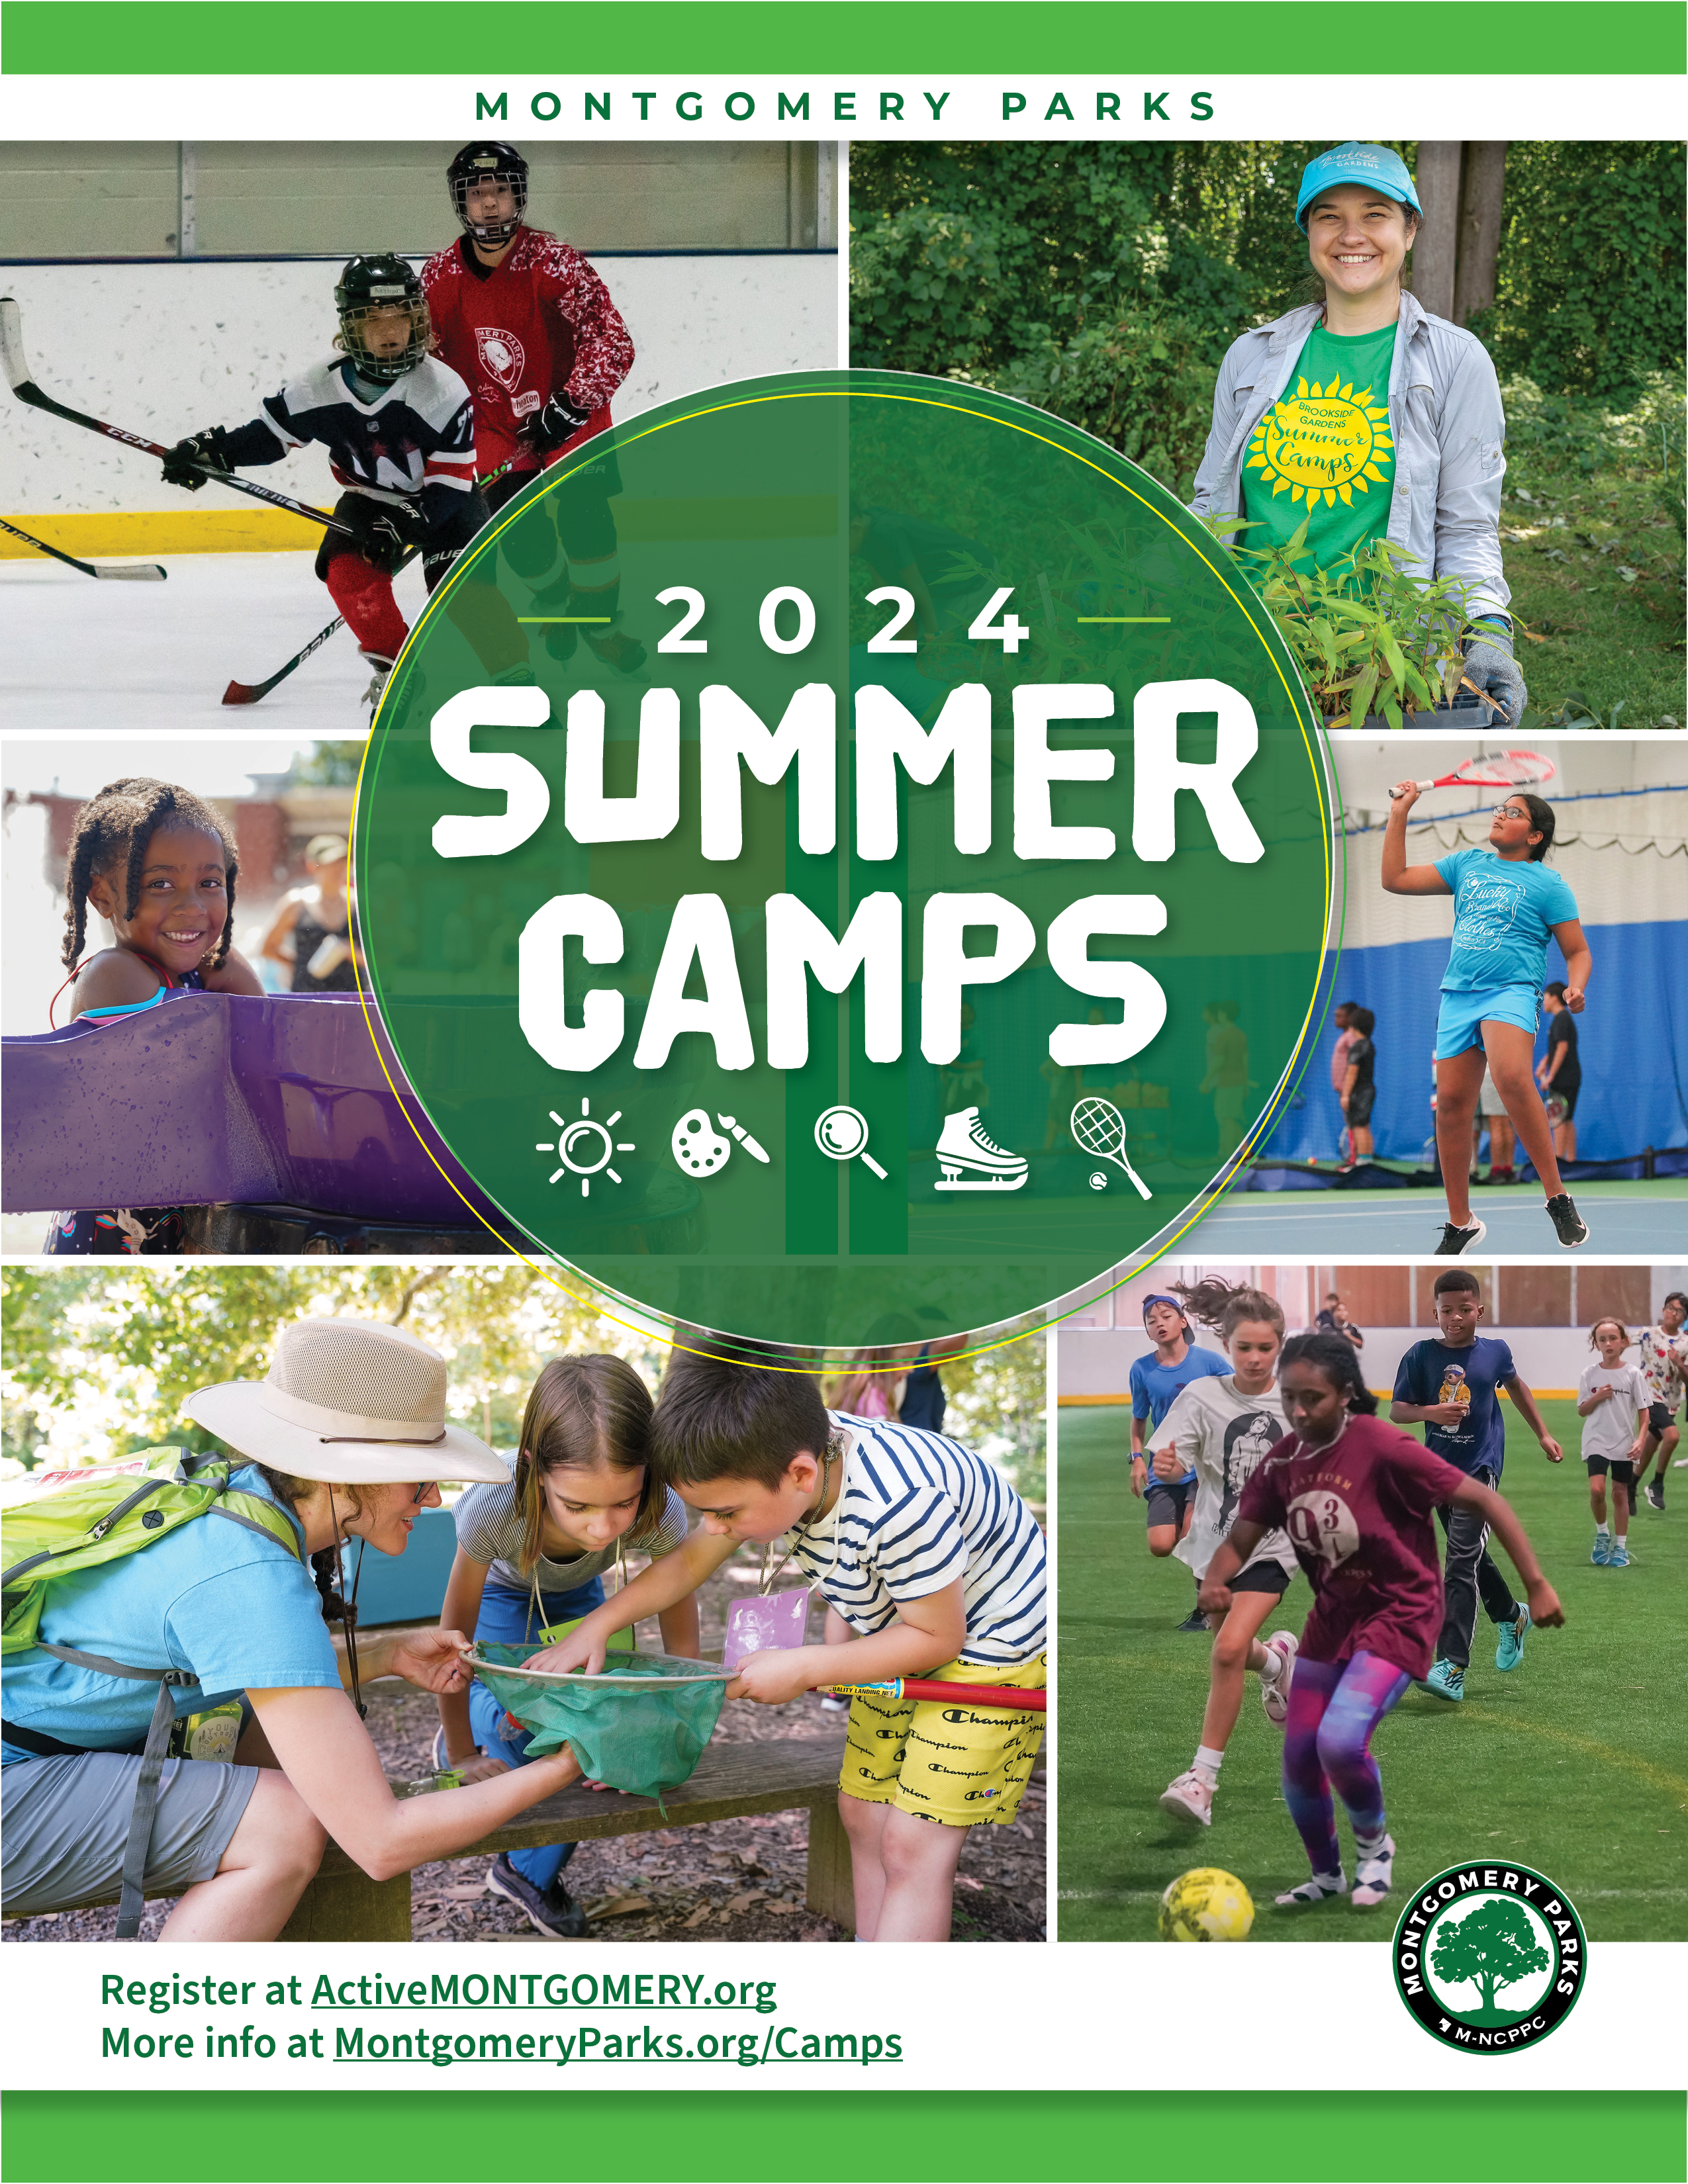 2024 Summer Camp Program Guide Cover features images of children participating in different activities.